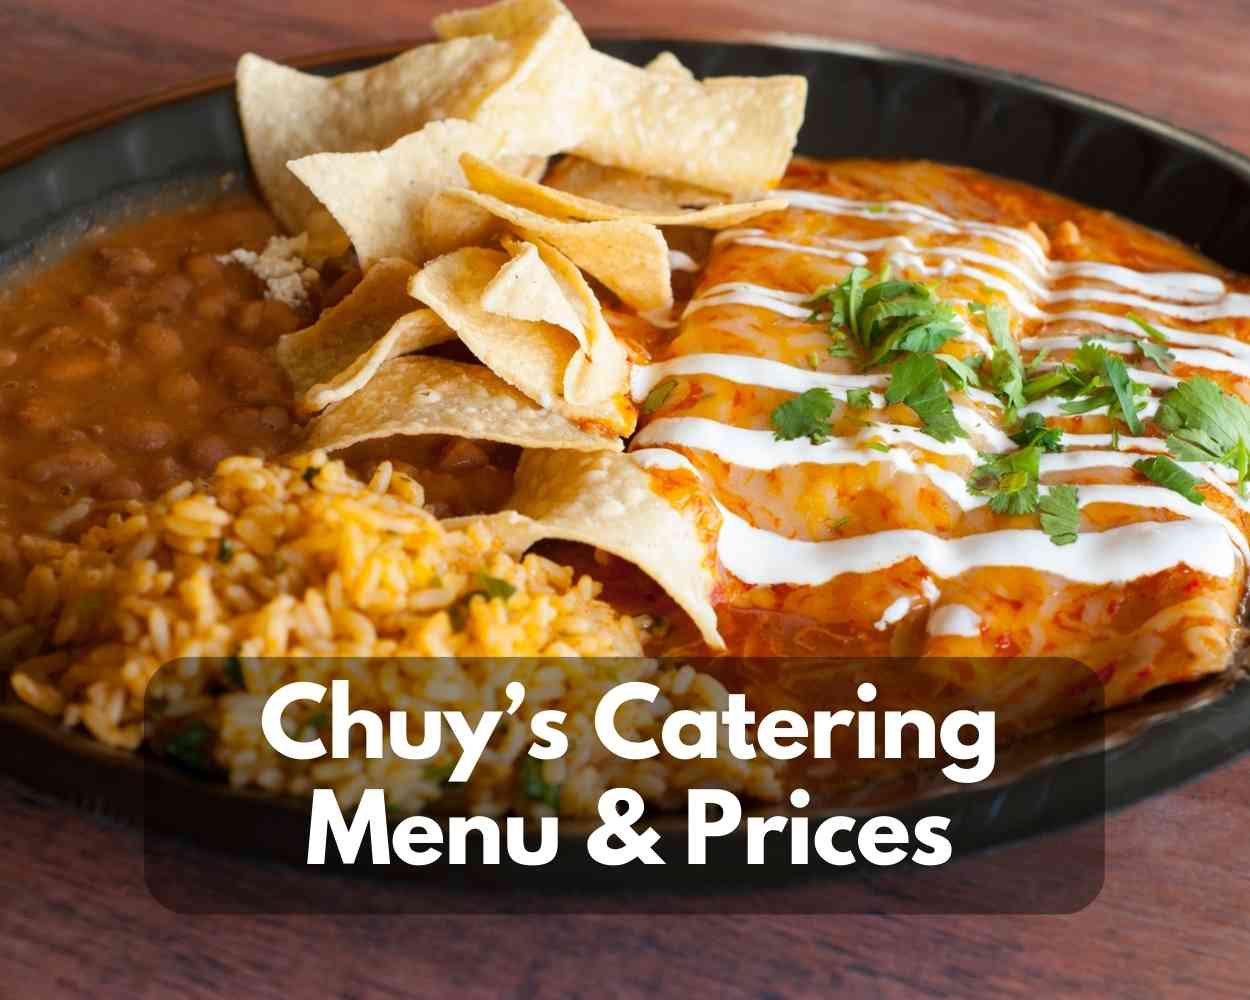 Chuy’s Catering Menu & Prices 2023 (Plan Wedding or Events With Tex-Mex Food)